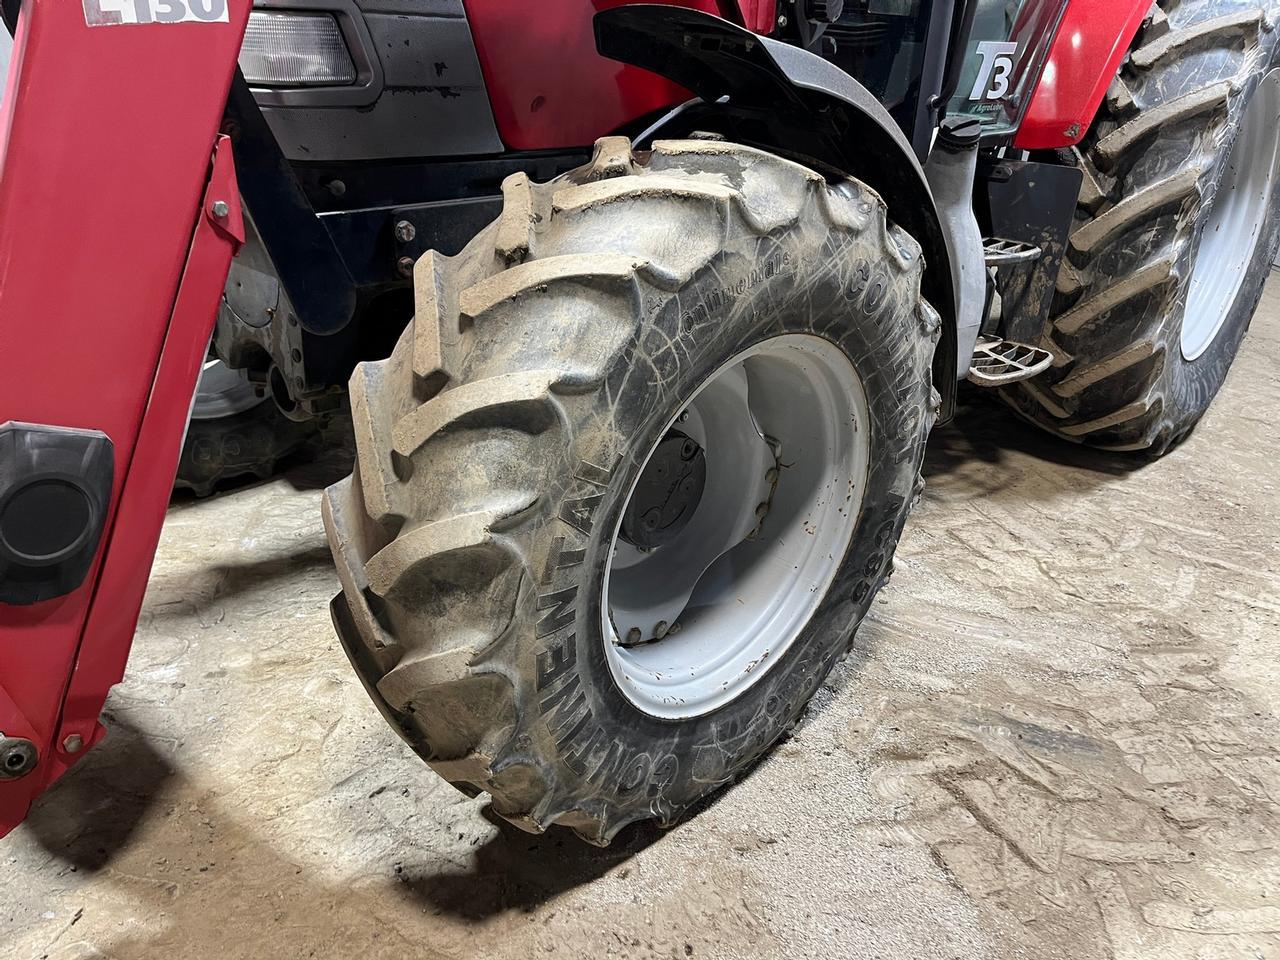 2012 McCormick CX110 Tractor with Cab and Loader